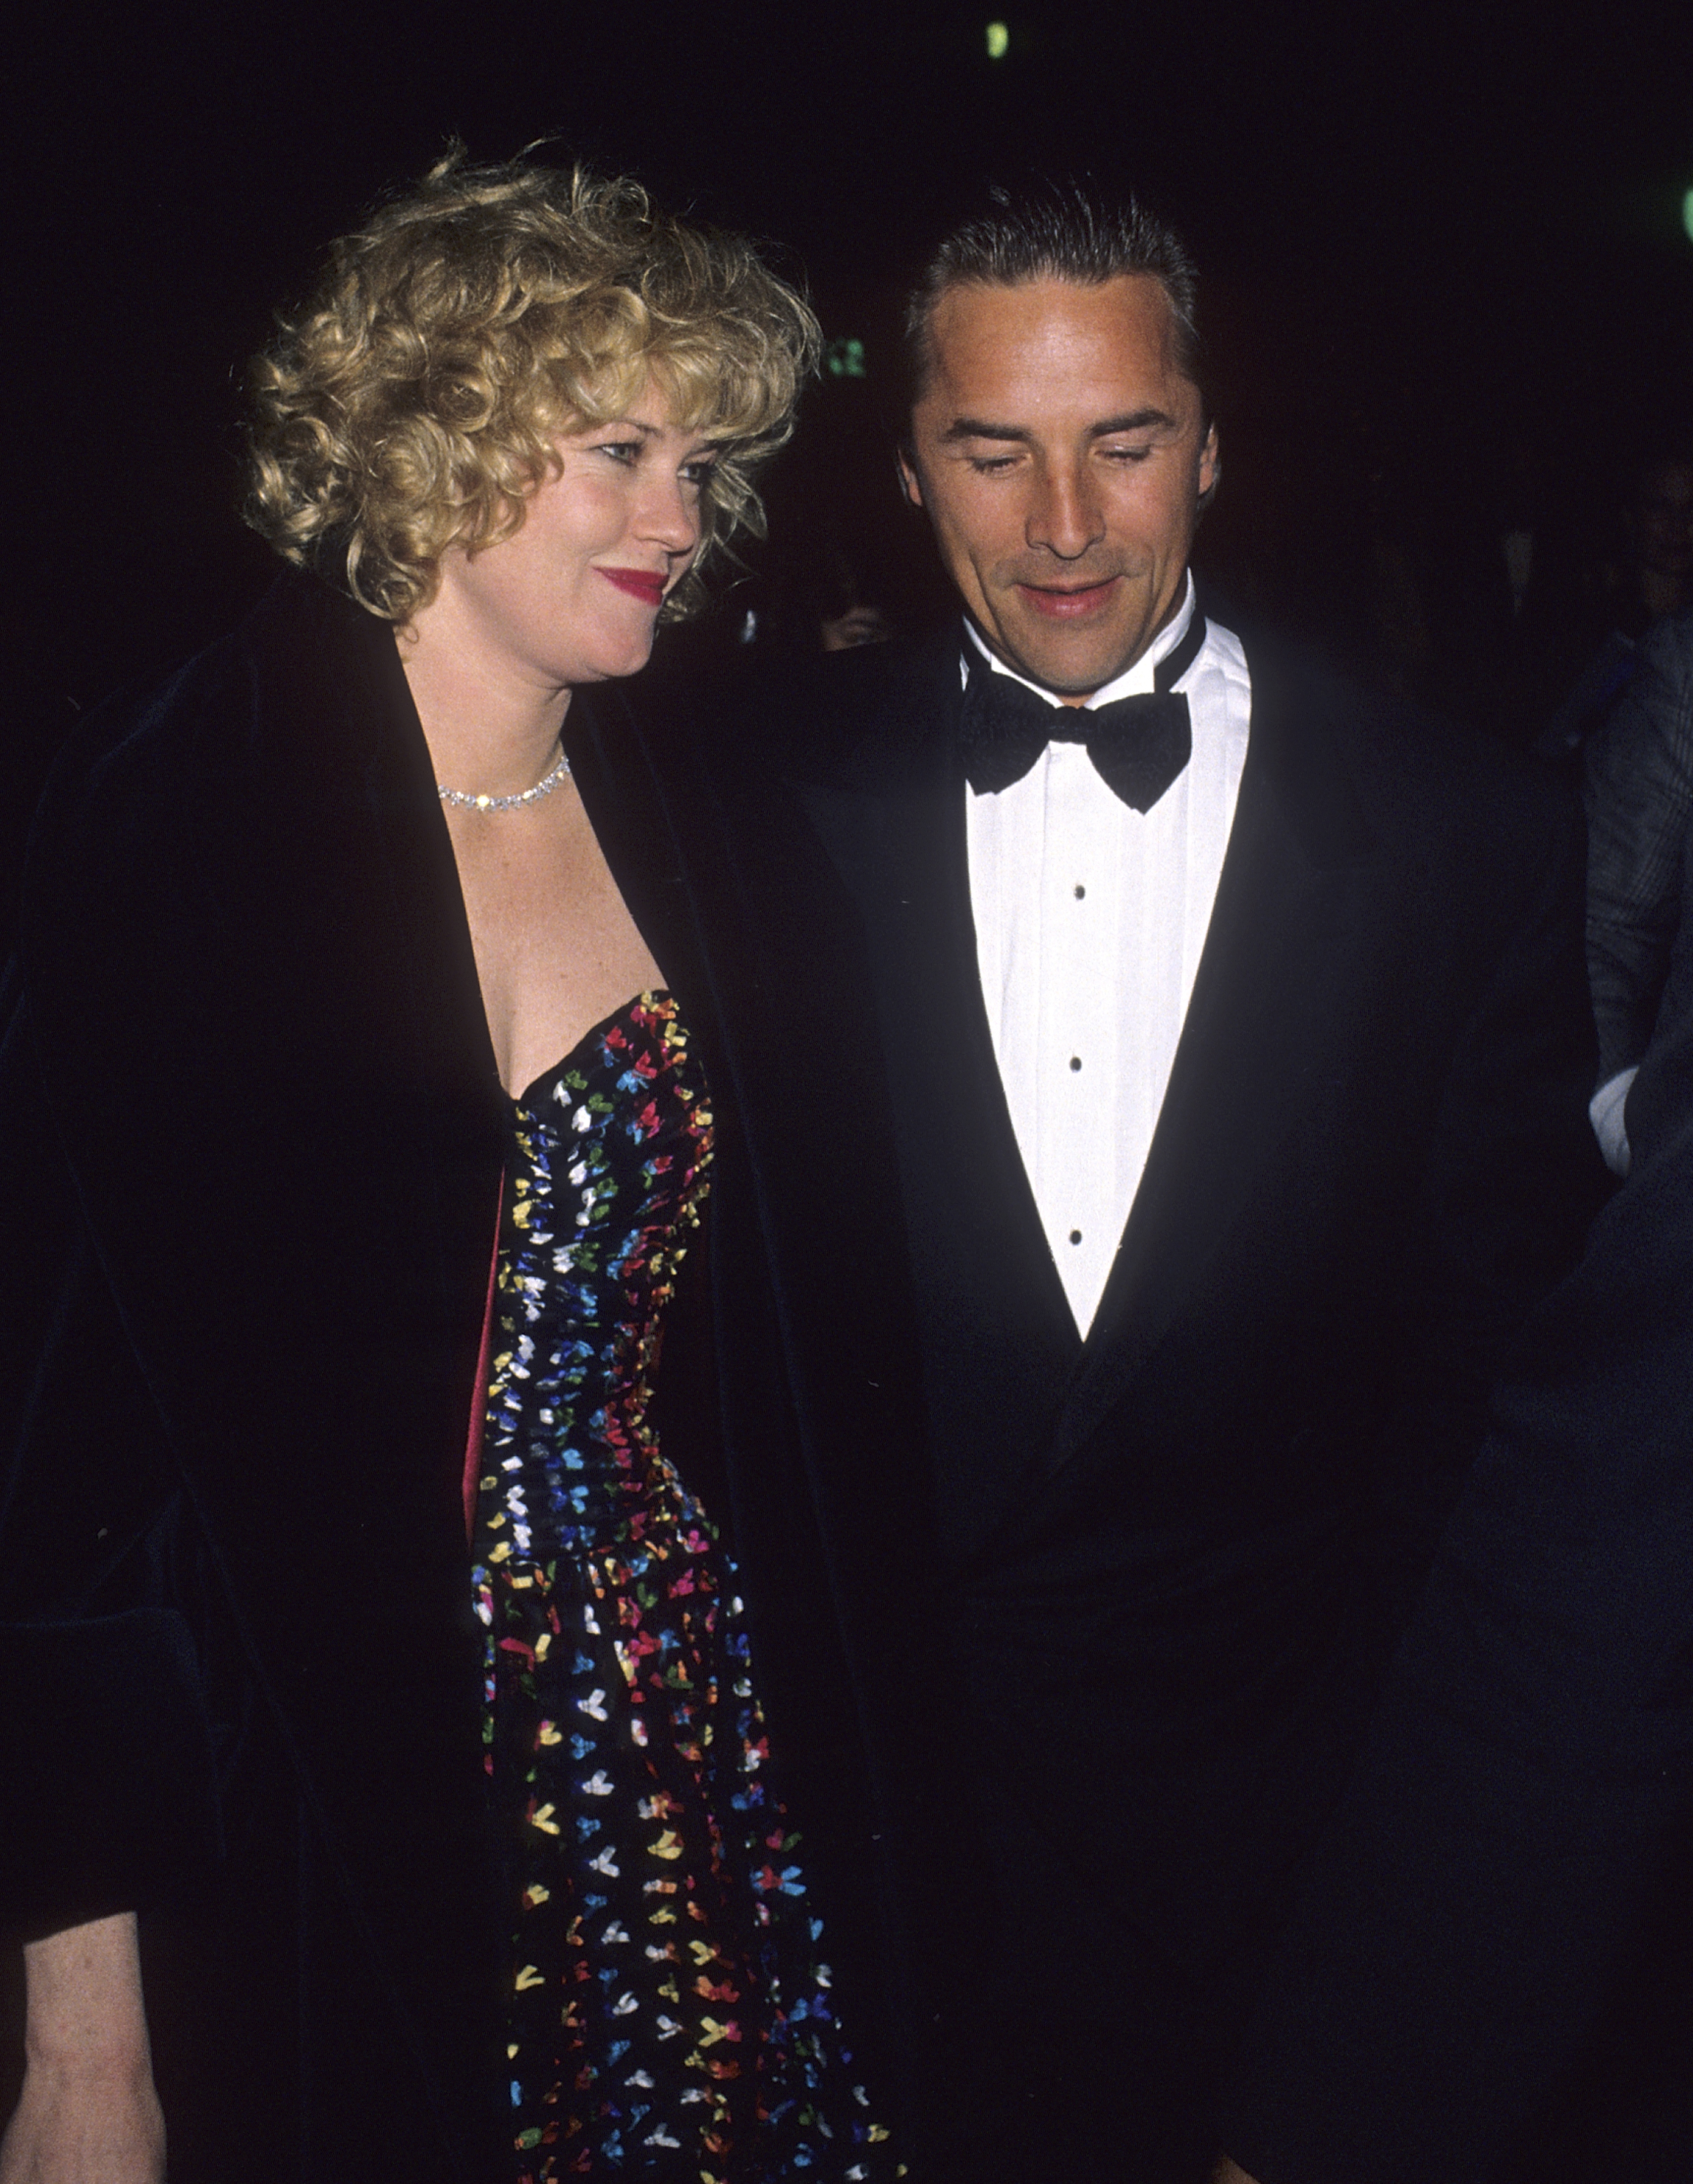 Melanie Griffith and Don Johnson attend the 16th Annual People's Choice Awards in Universal City, California on March 11, 1990. | Source: Getty Images